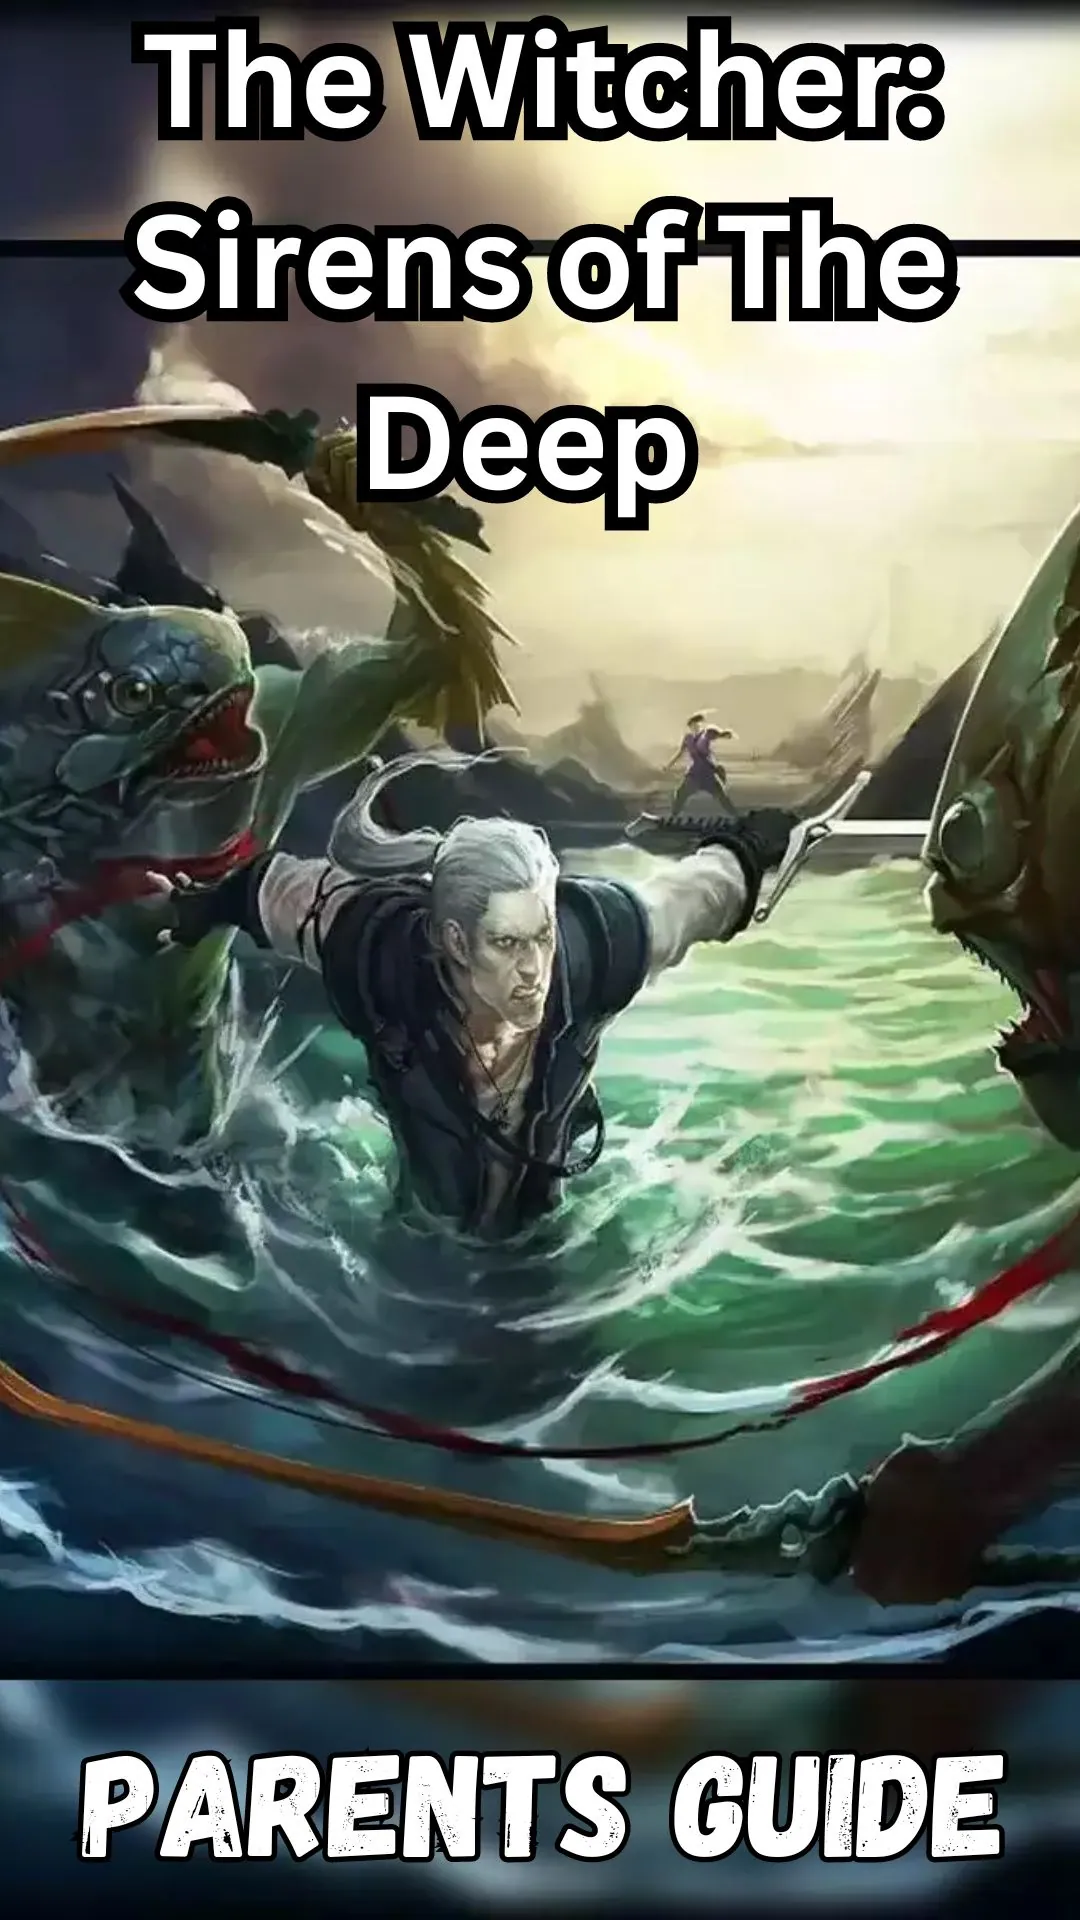 The Witcher Sirens of The Deep Parents Guide (1)